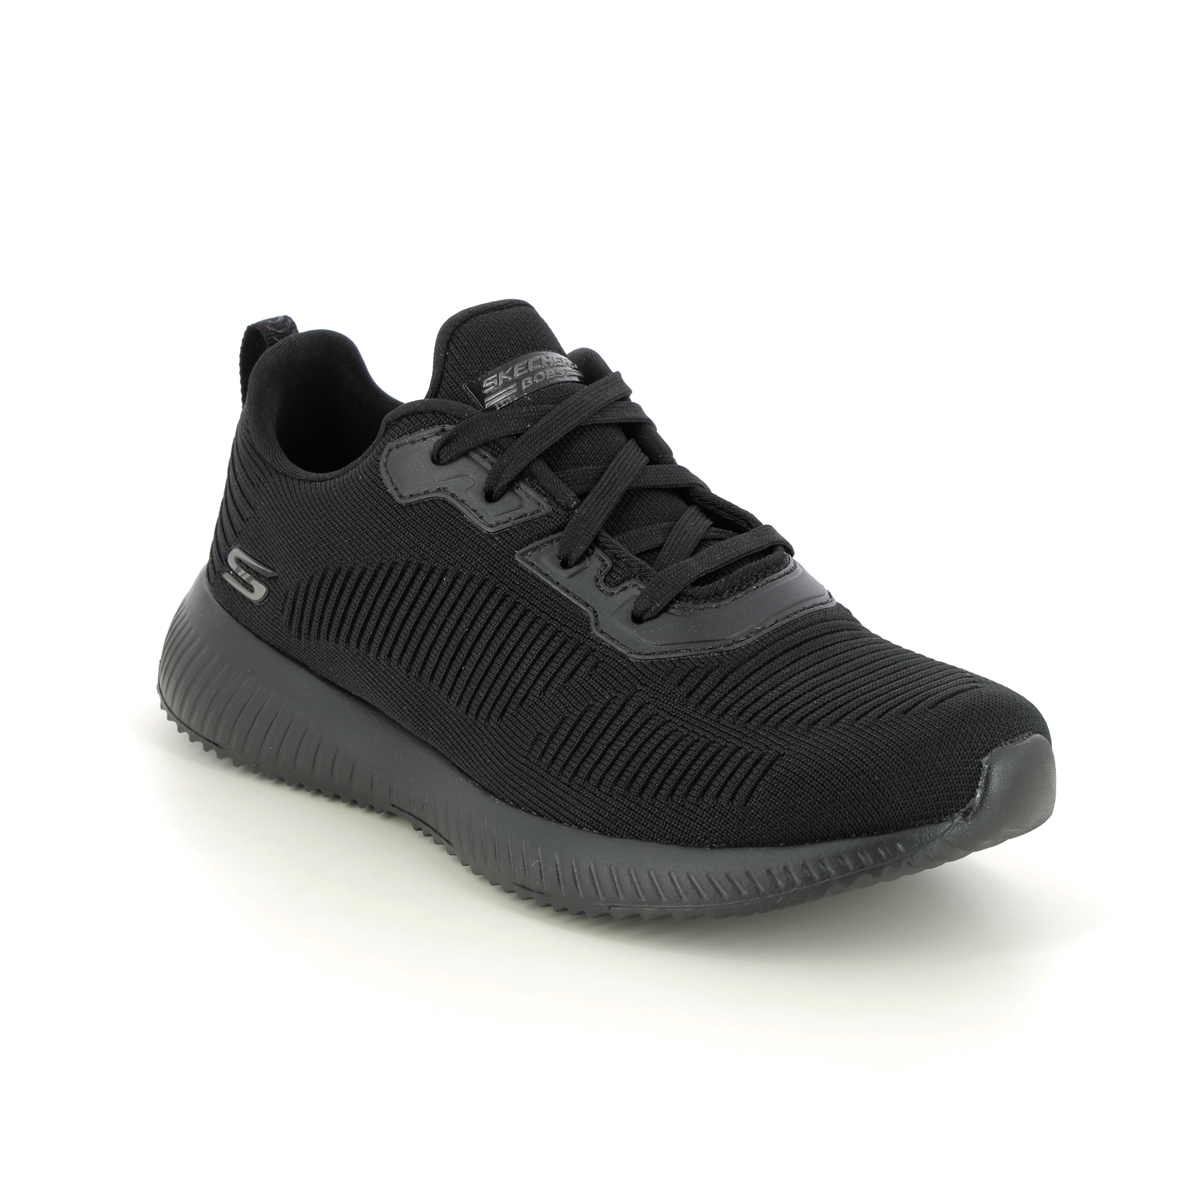 Skechers Bobs Squad Wide BBK Black Womens trainers 32504W in a Plain Textile in Size 4.5